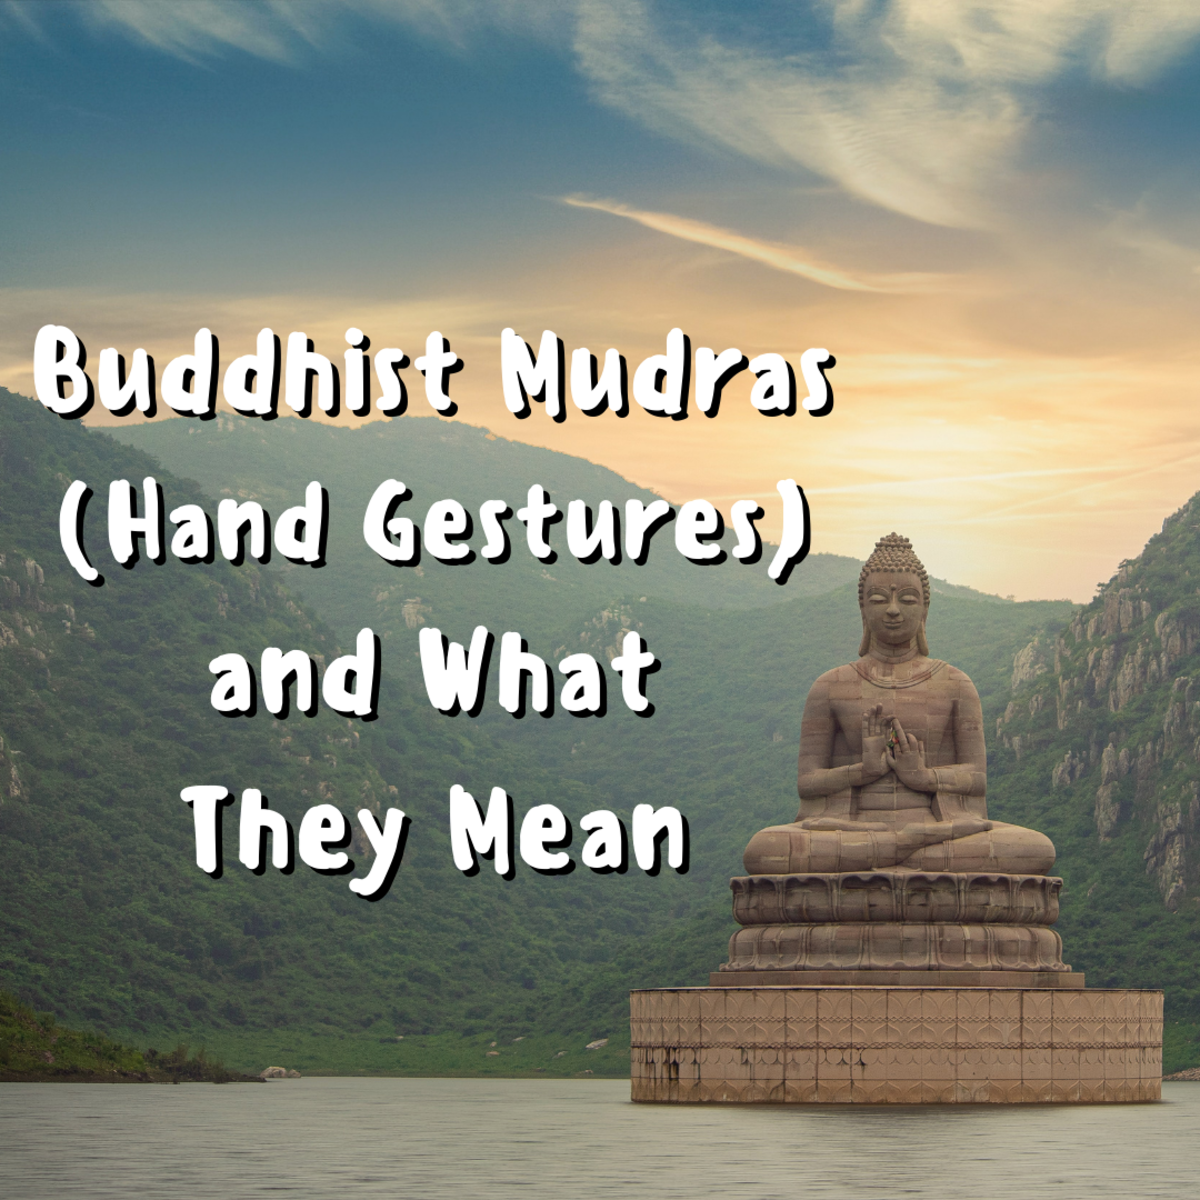 Buddha Hand Gestures (Mudras) and Their Meaning